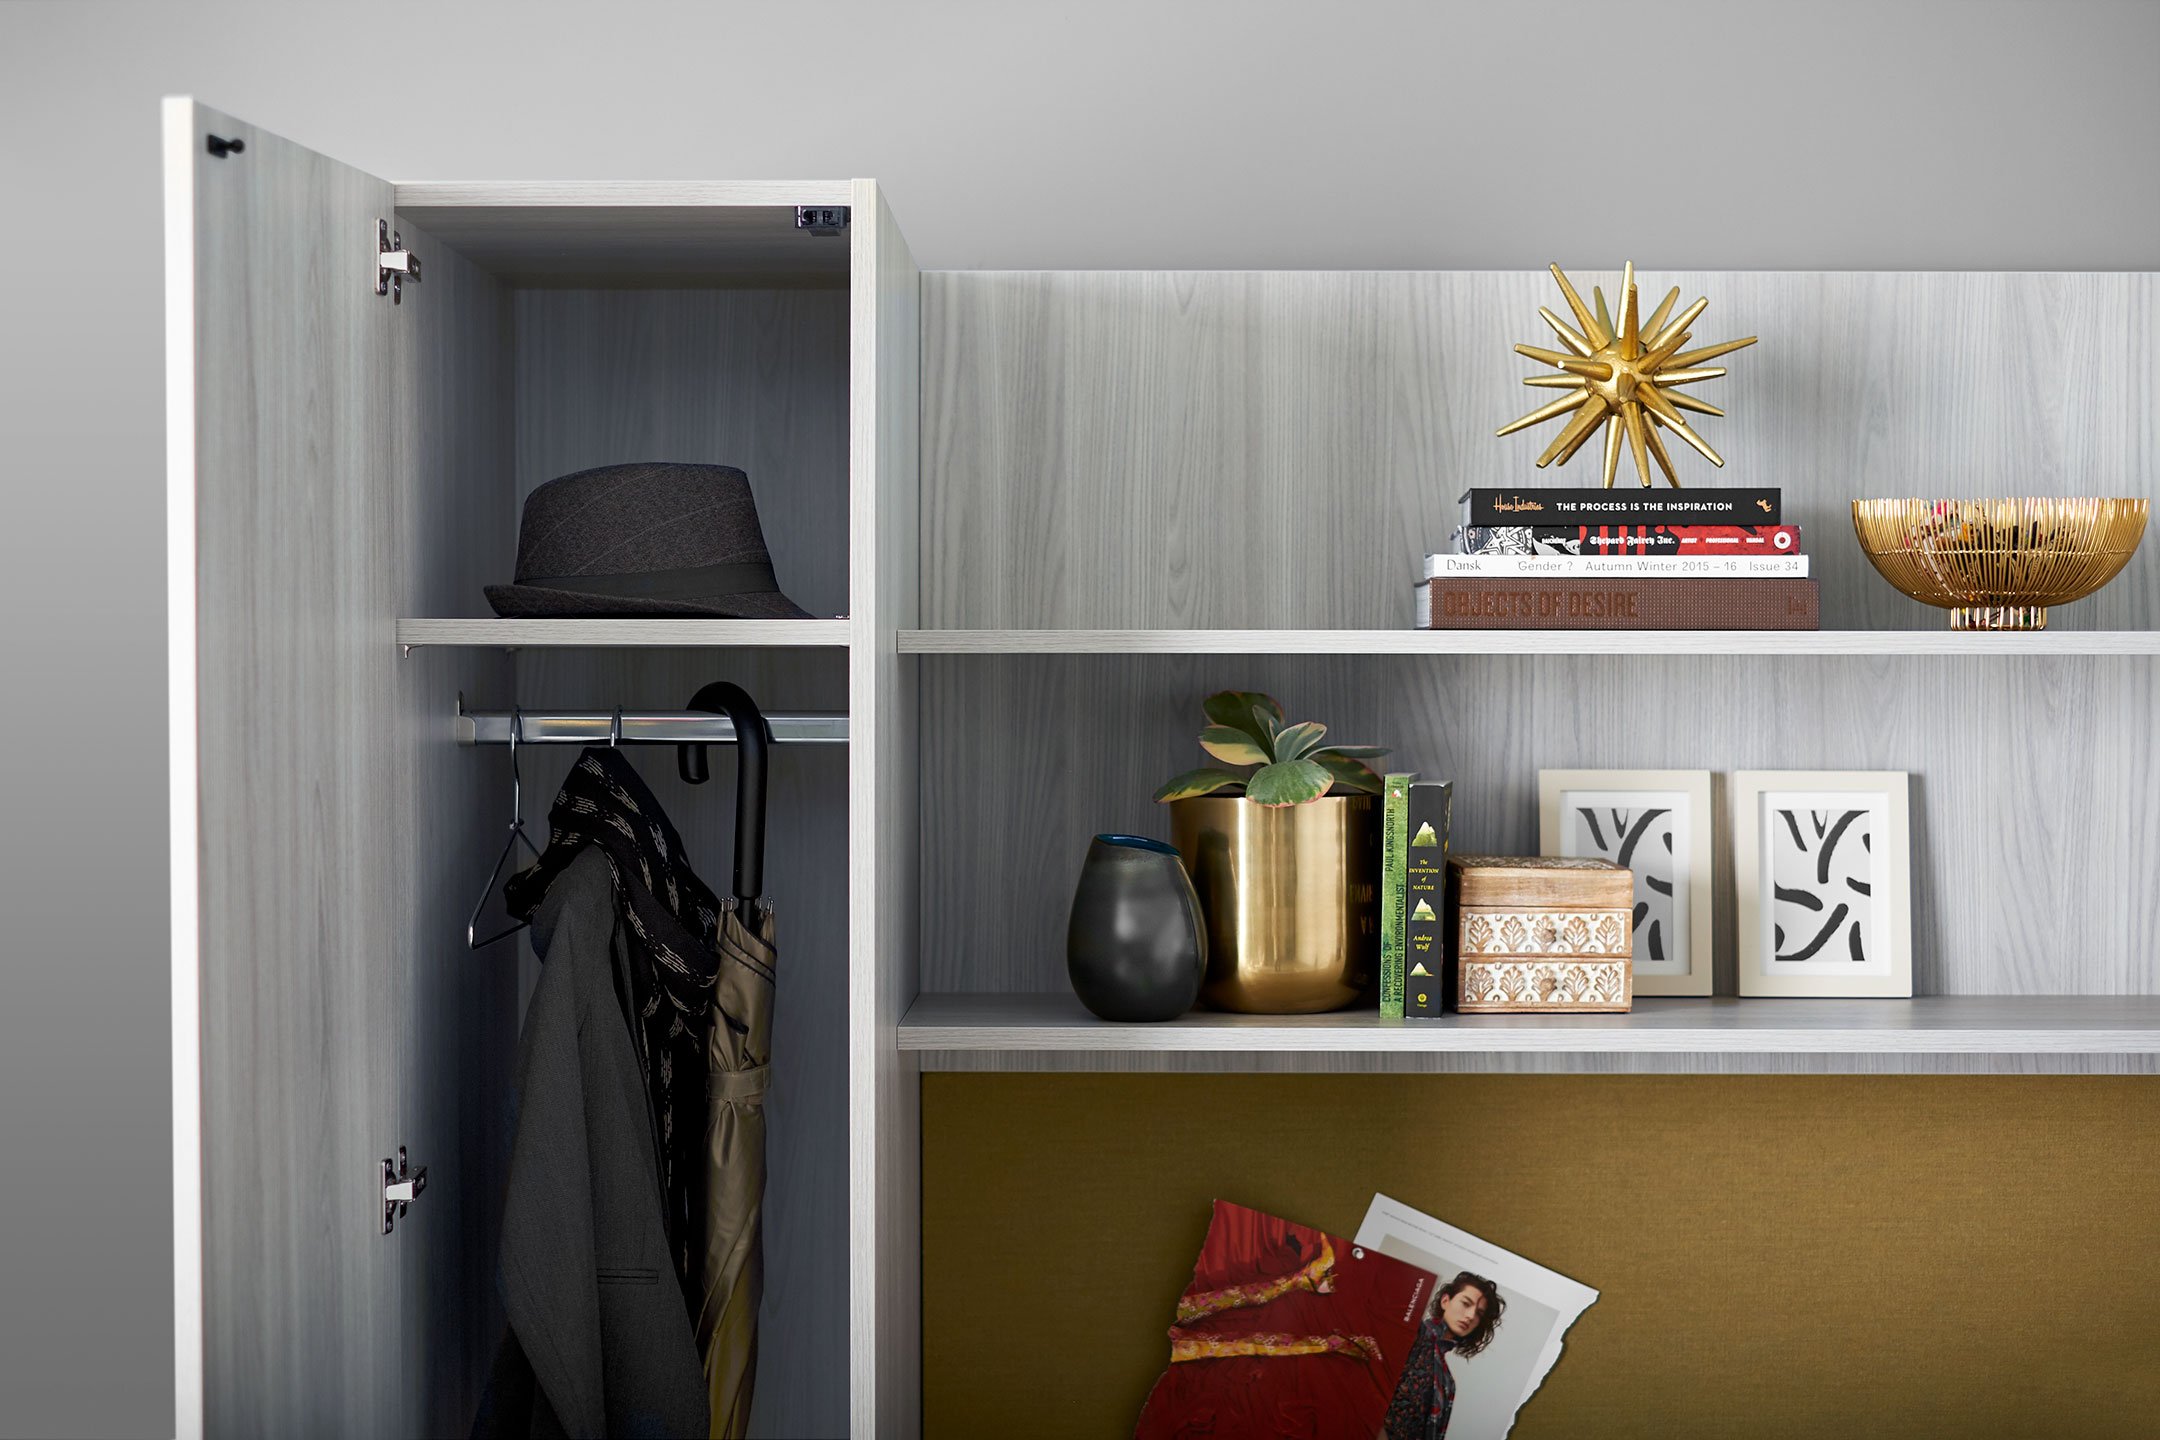 Haworth Masters Series Workspace in grey veneer showing an open coat closet and shelves with photos and books on them with a corkboard beneath